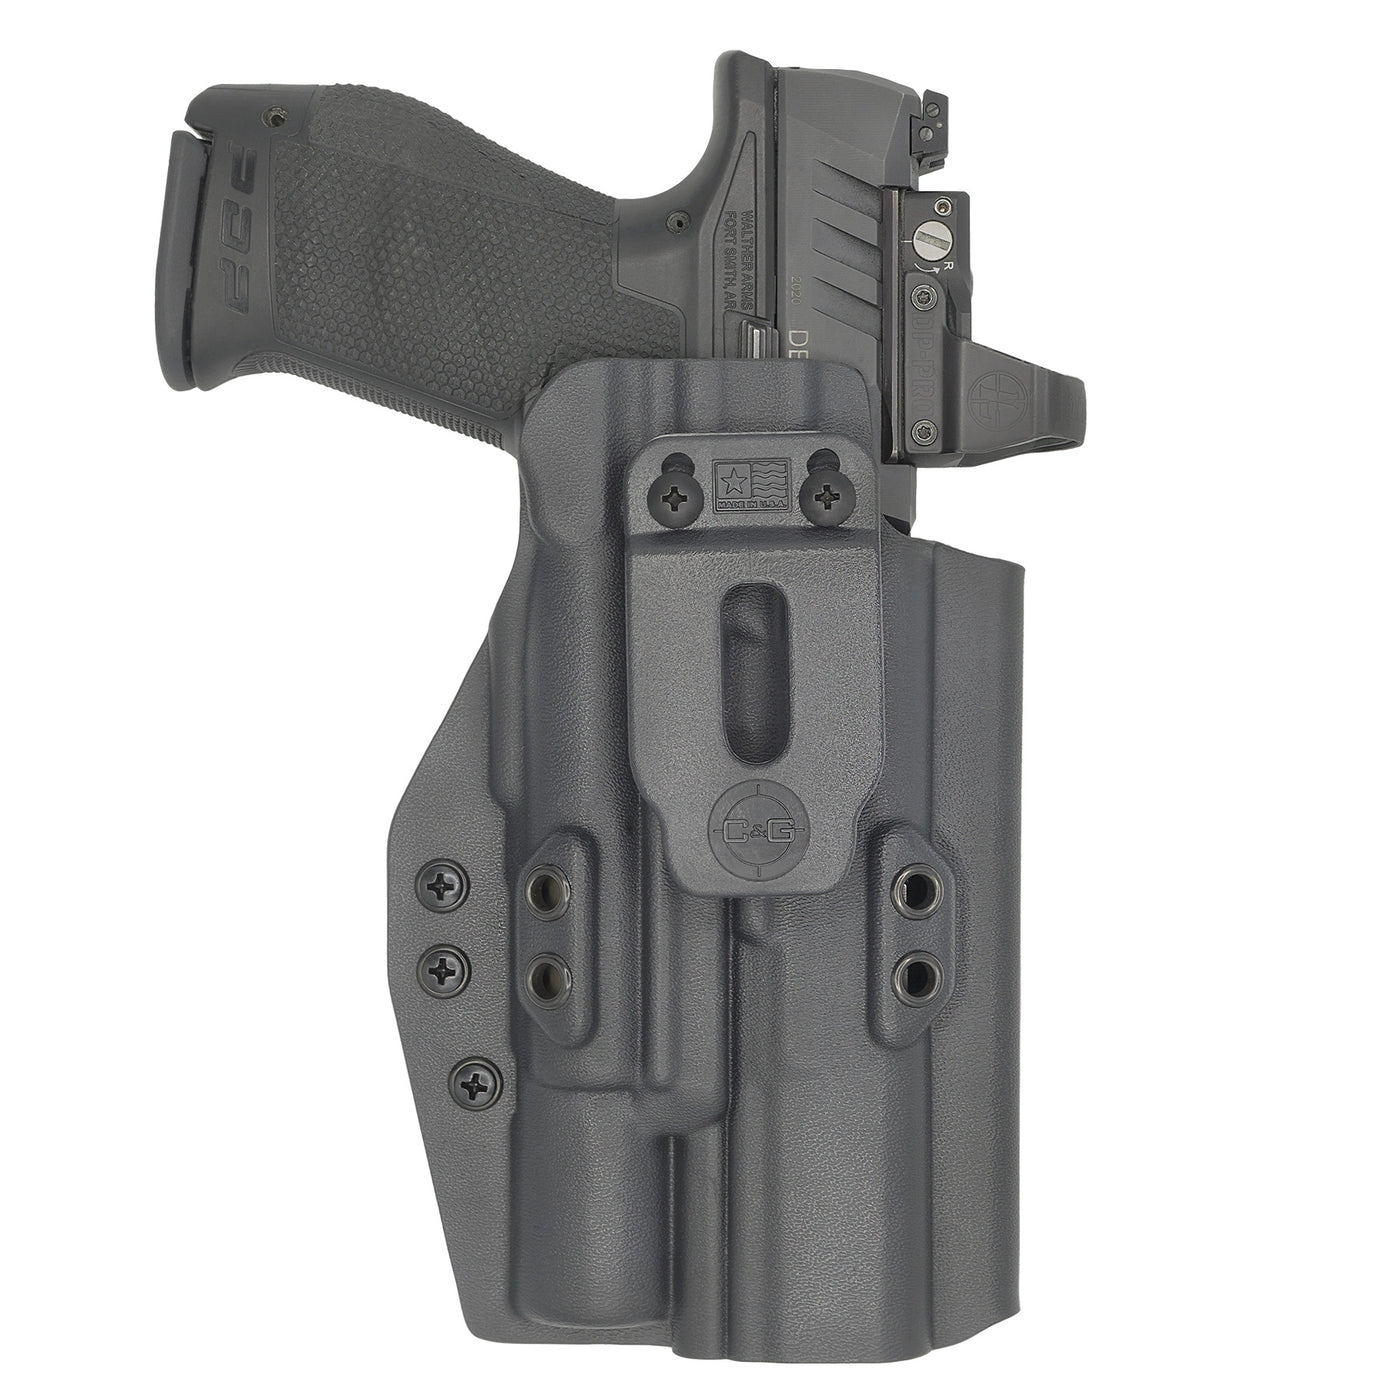 C&G Holsters custom IWB Tactical Beretta Surefire X300 in holstered position